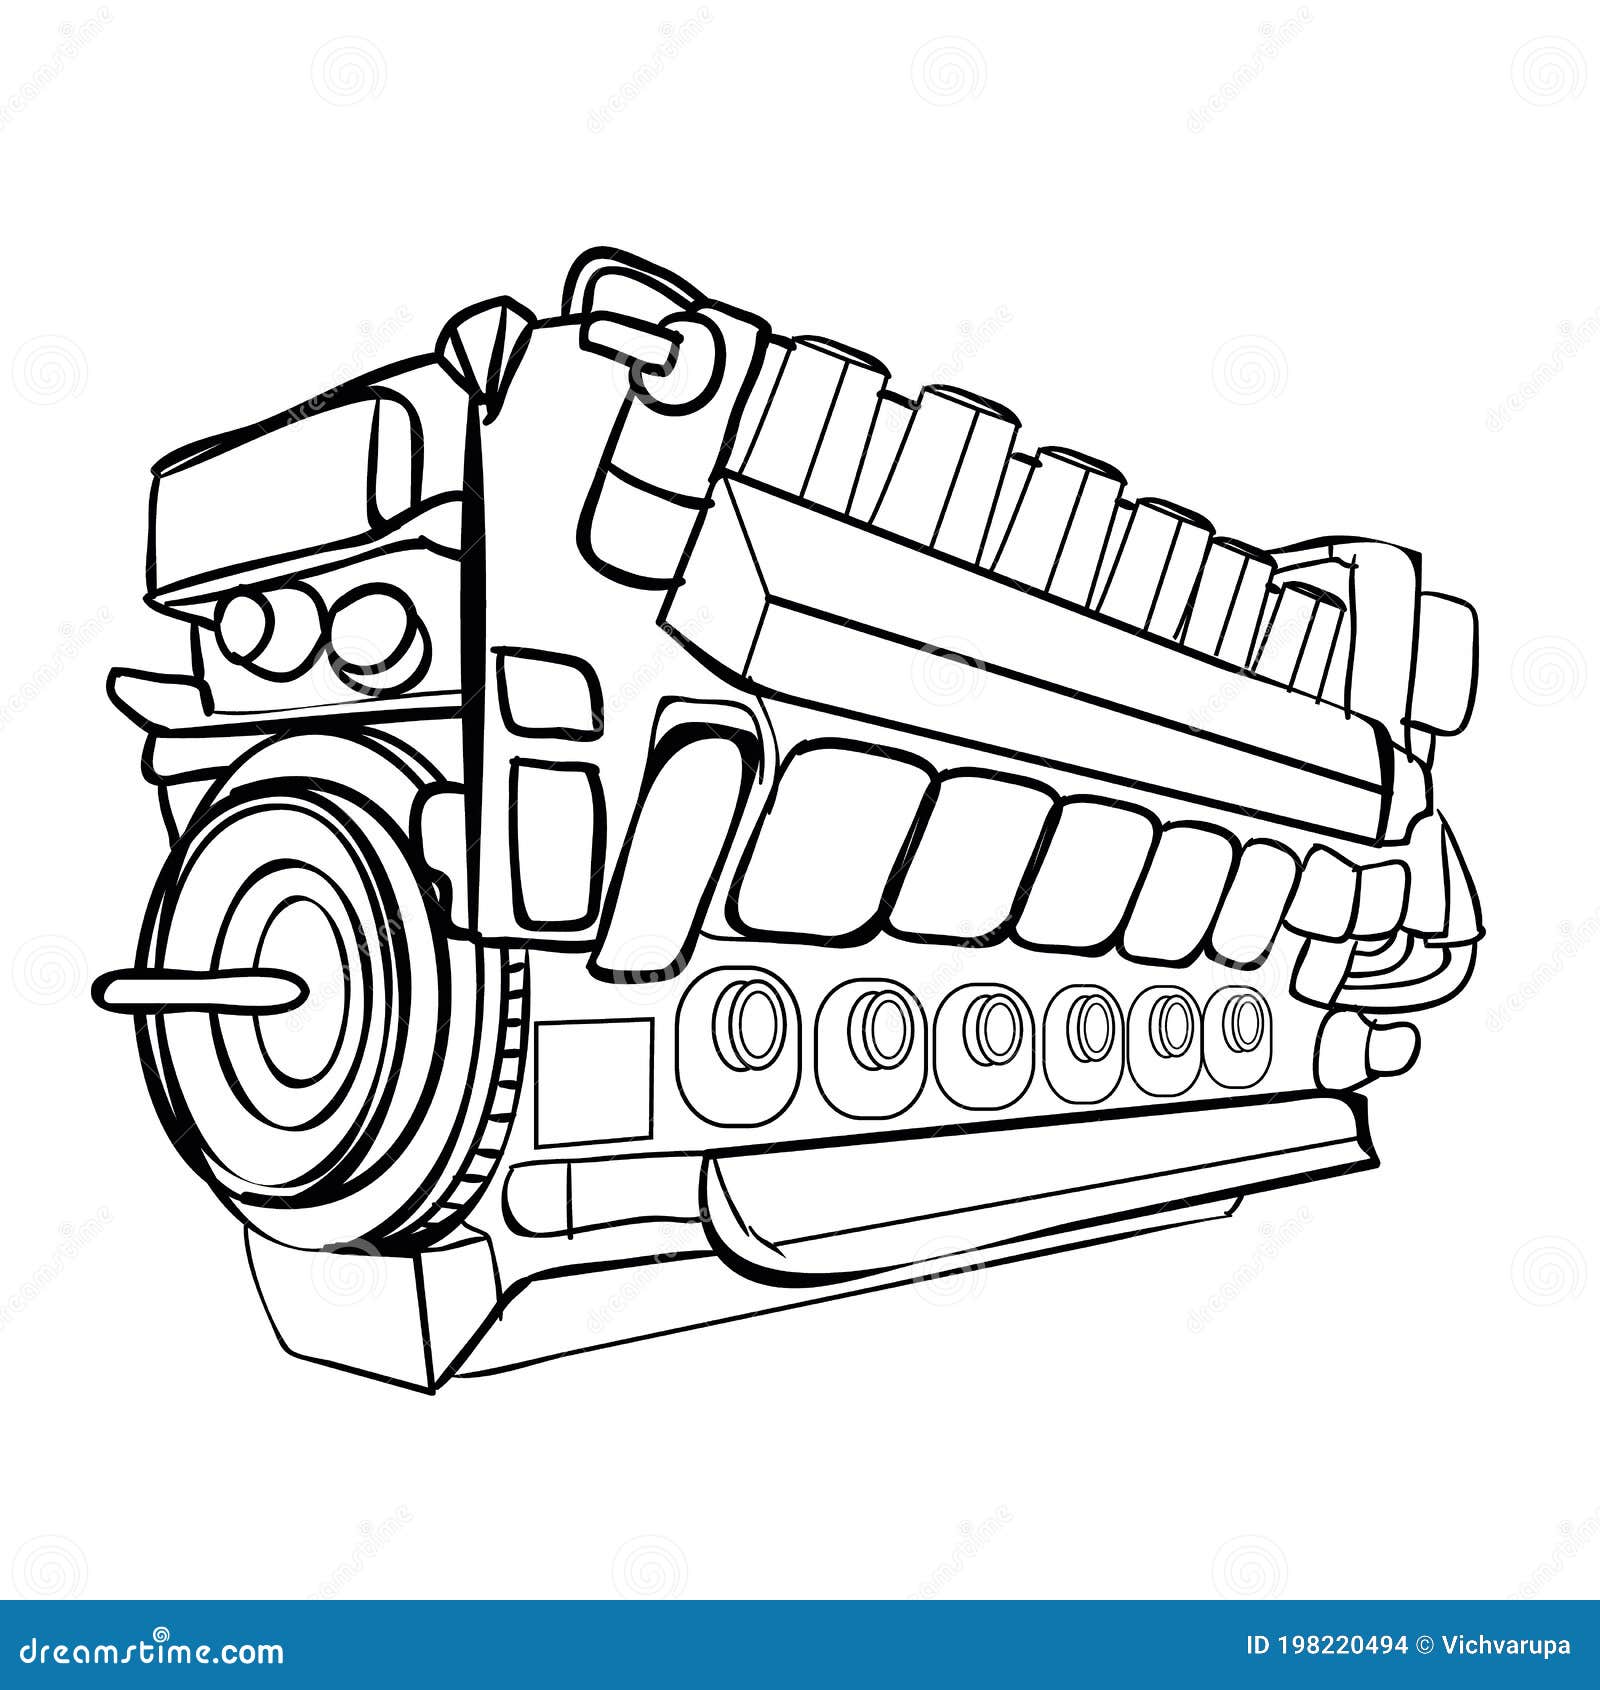 170 V8 Car Engine Drawing Images, Stock Photos & Vectors | Shutterstock